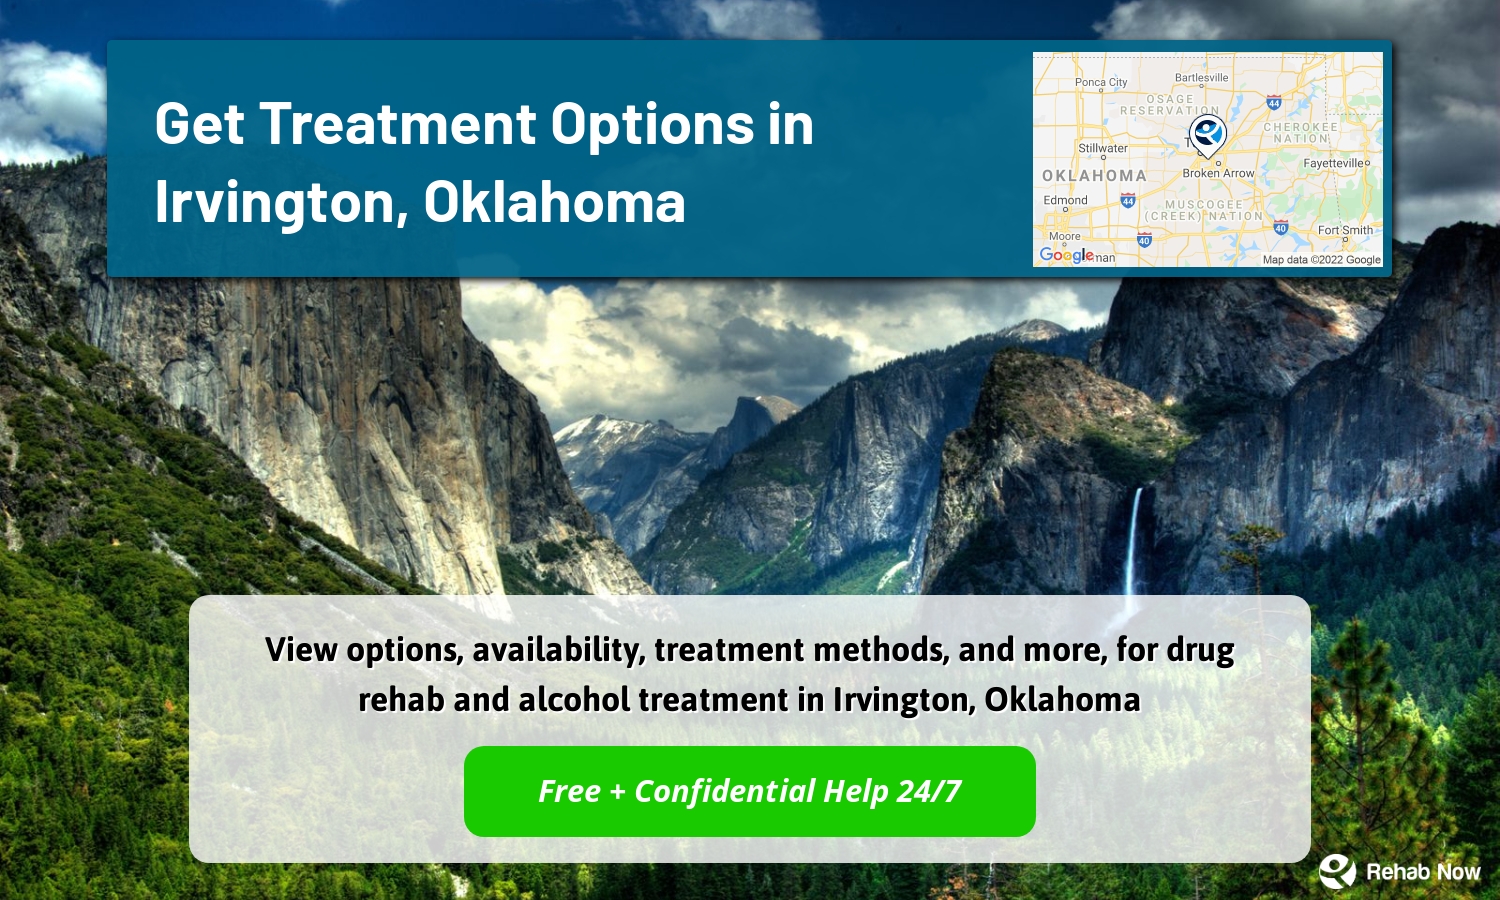 View options, availability, treatment methods, and more, for drug rehab and alcohol treatment in Irvington, Oklahoma